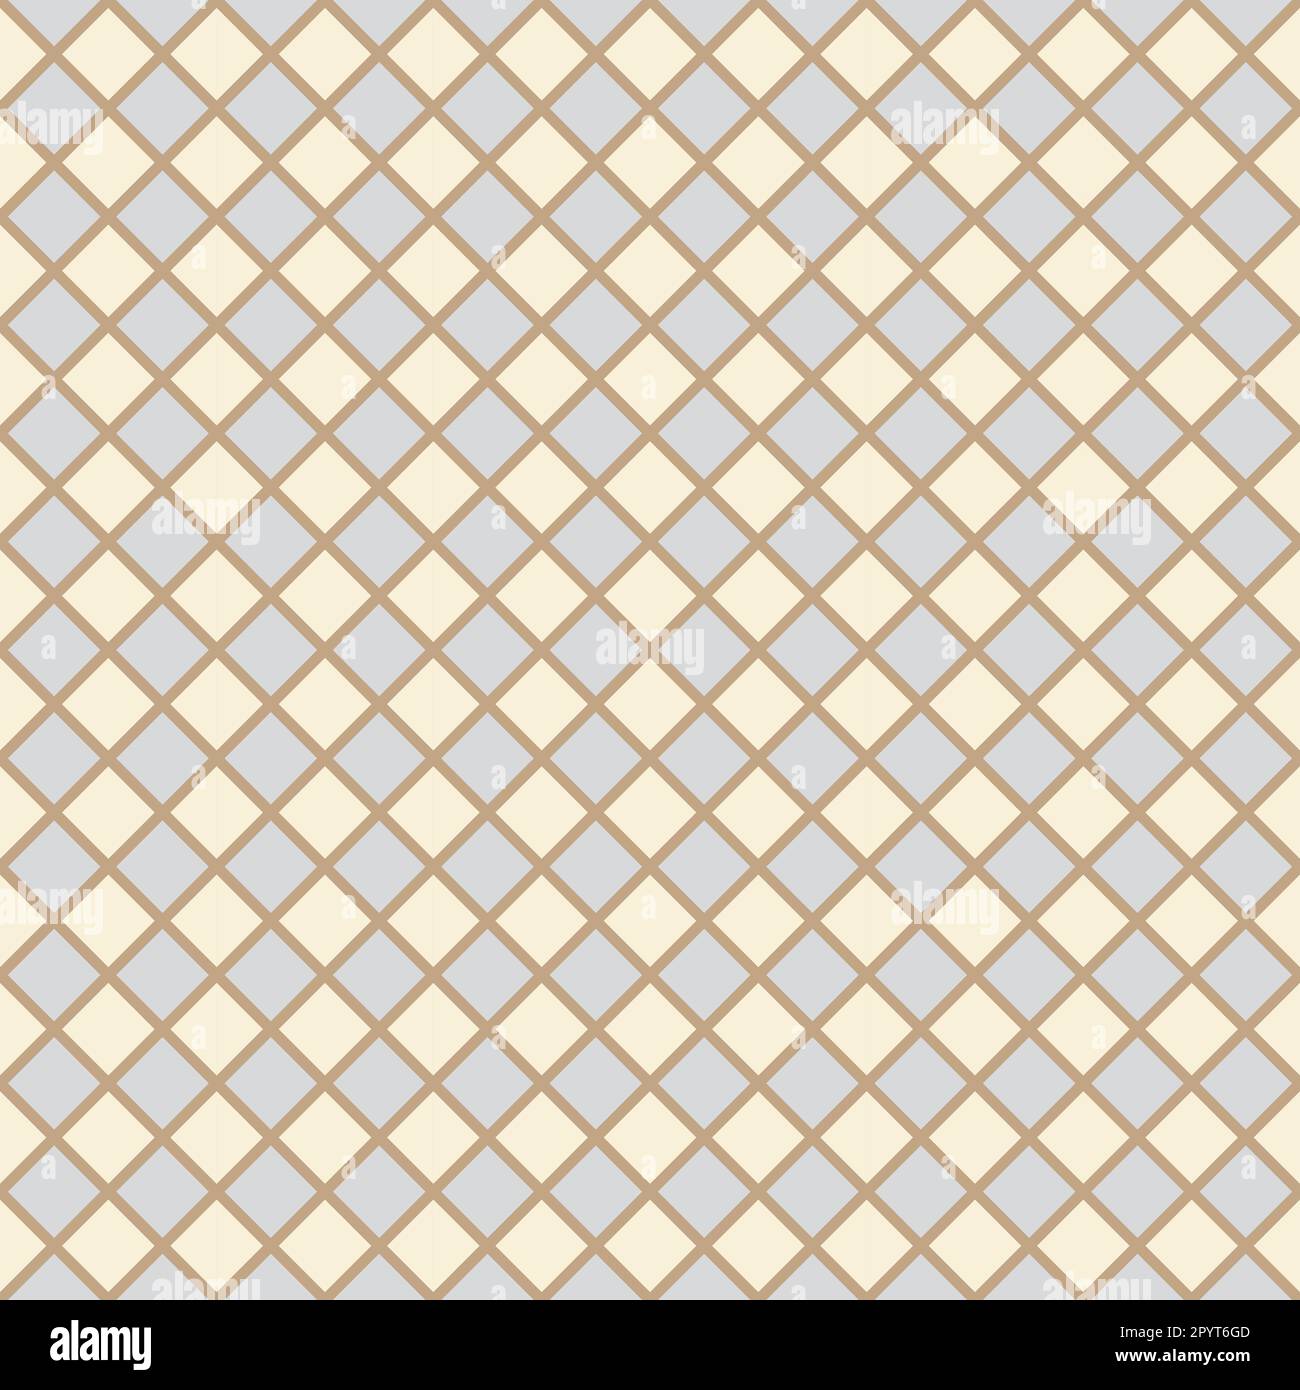 Diagonal Gingham Checker Pattern. Contemporary Pastel Beige Light Grey And Brown Linen Textured Diamond Background. Argyle Style Vintage Rustic Stock Vector